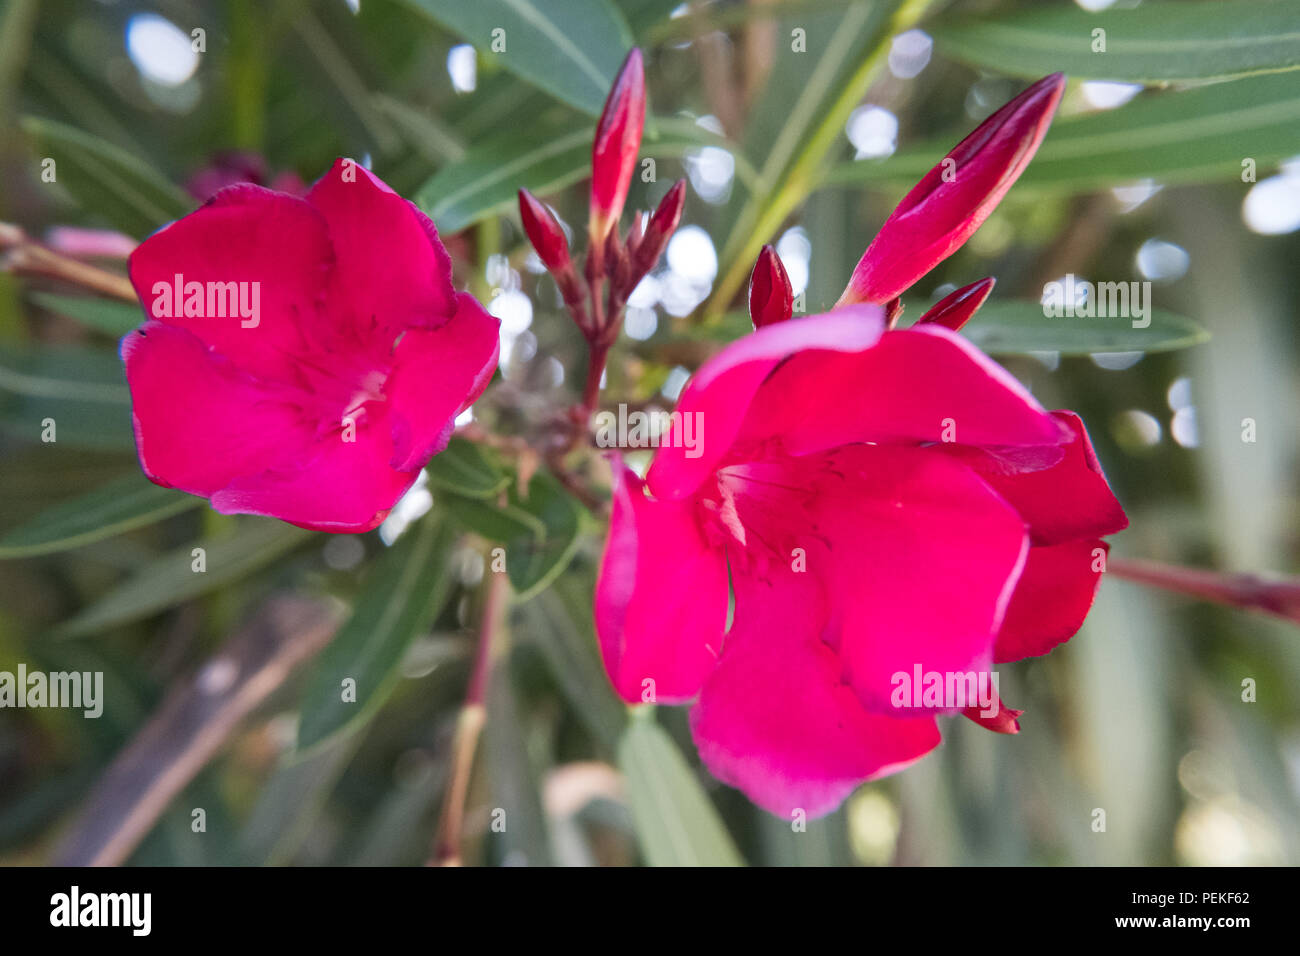 Blooming red Nerium Oleander flower and buds in a green garden. Beautiful nature photo wallpaper background. No people. Stock Photo